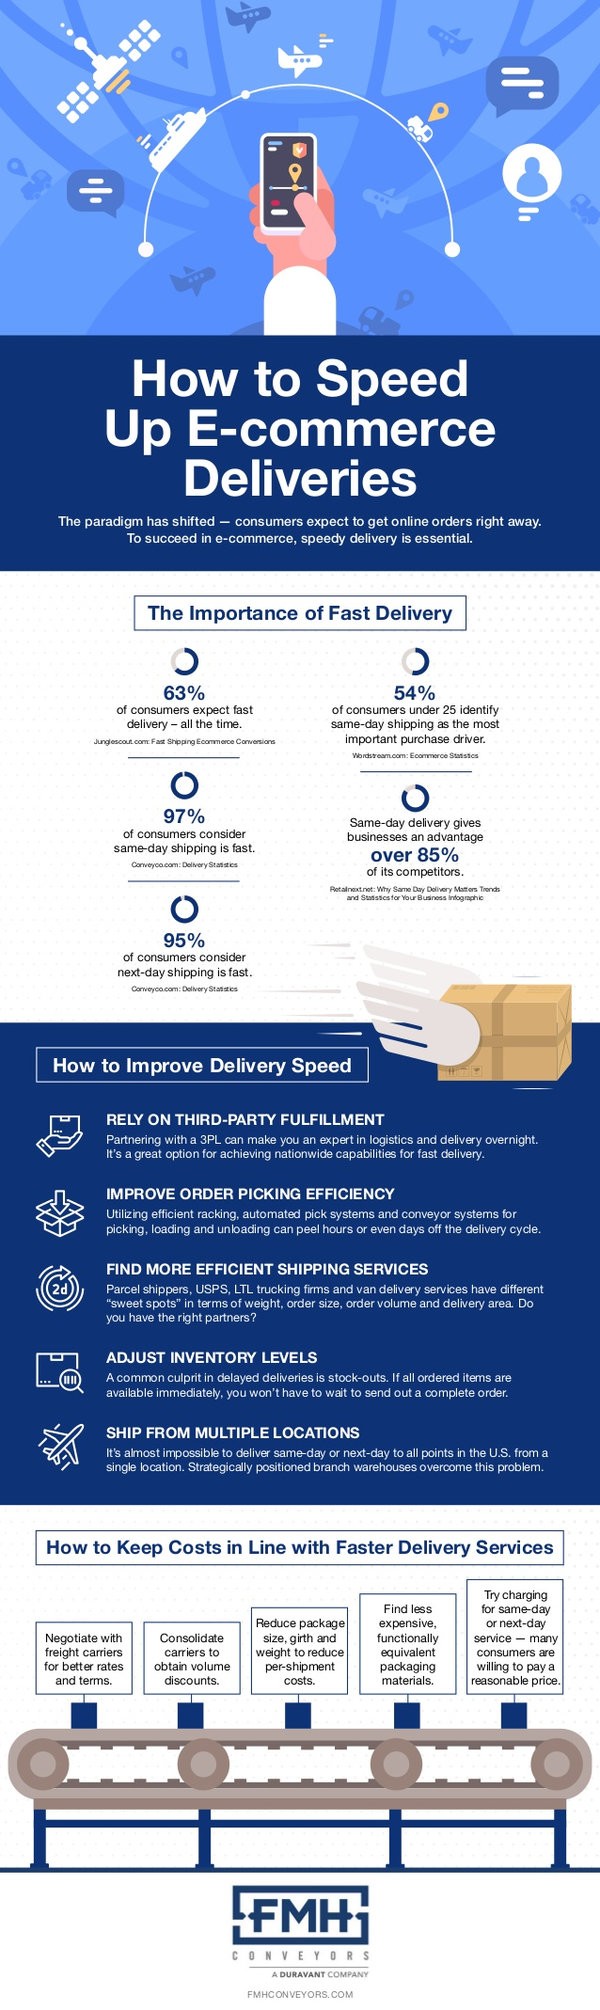 speed up e-commerce deliveries